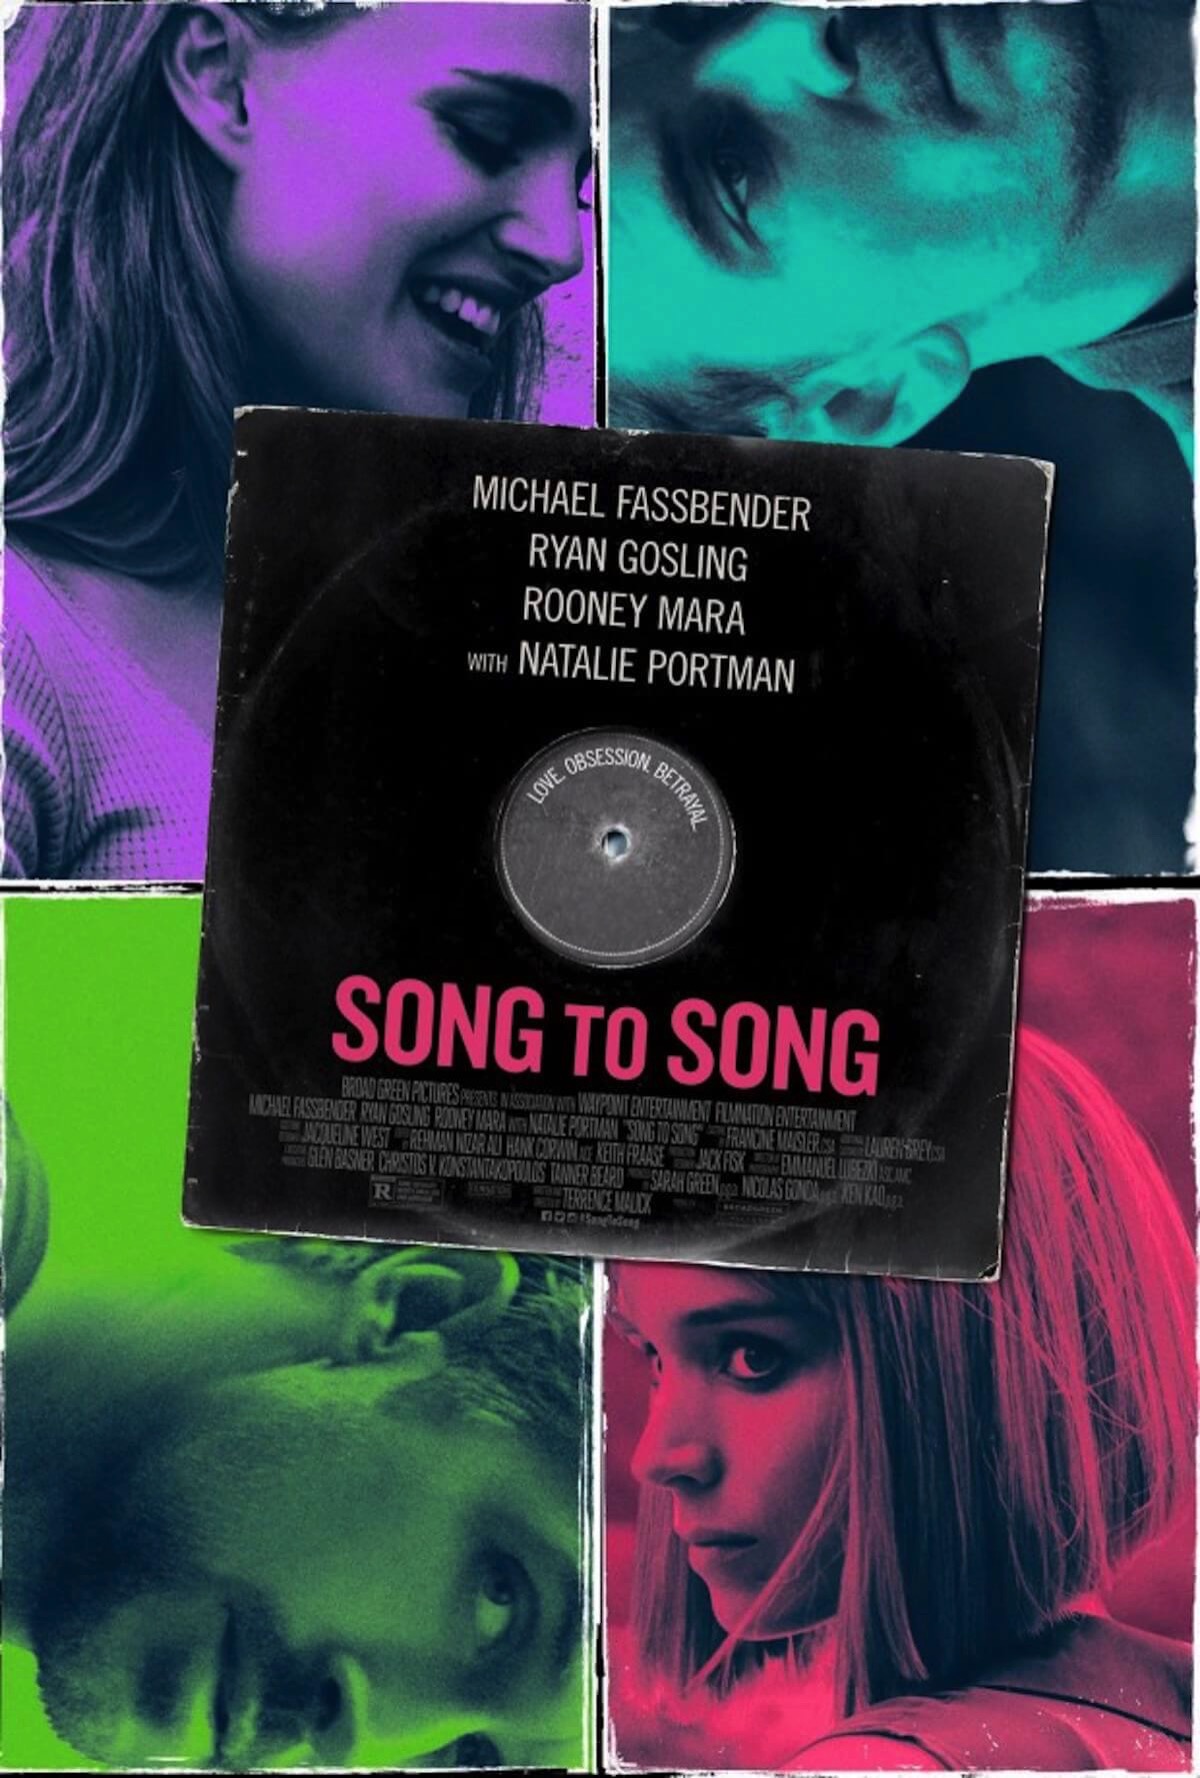 Song to song poster